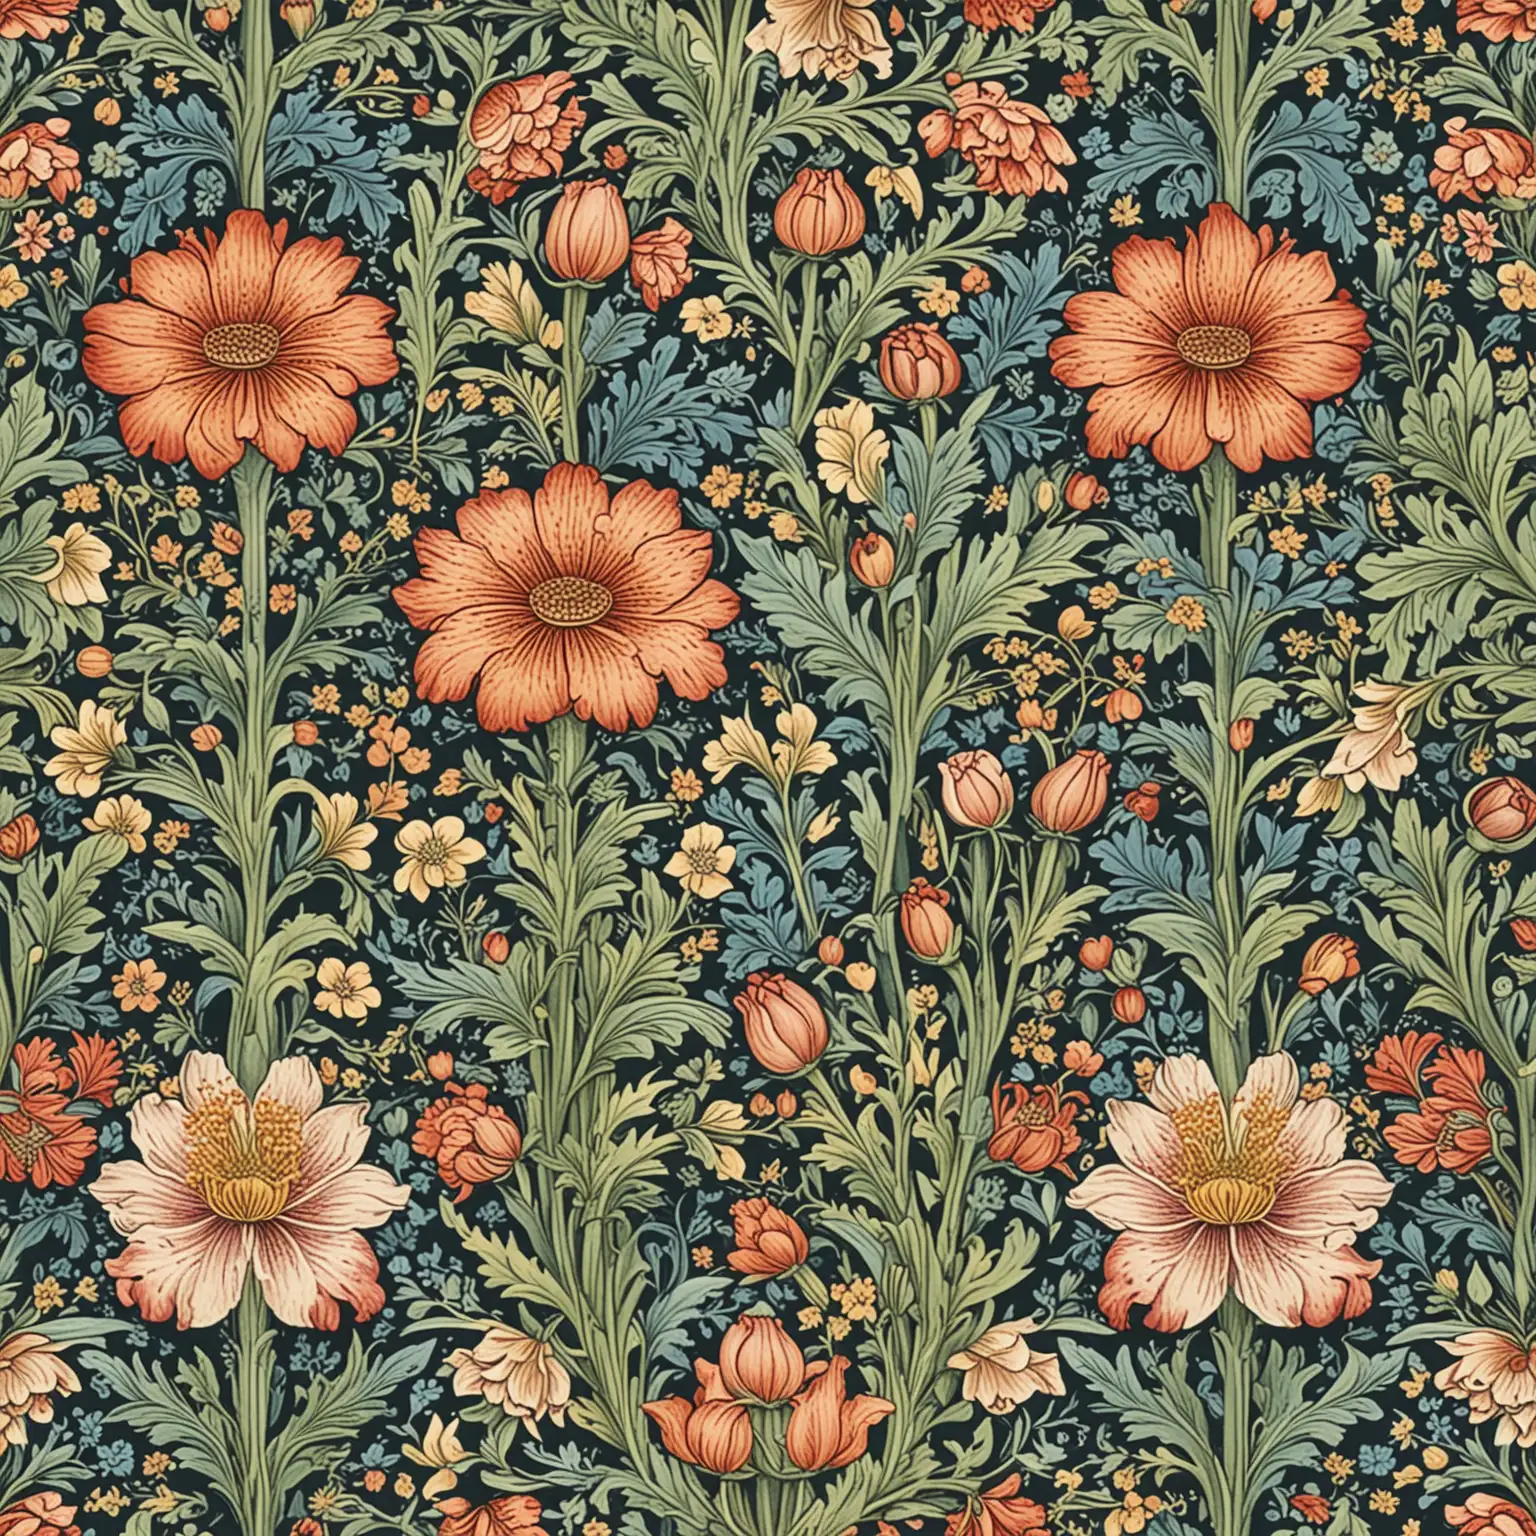 William Morris Style design with flowers